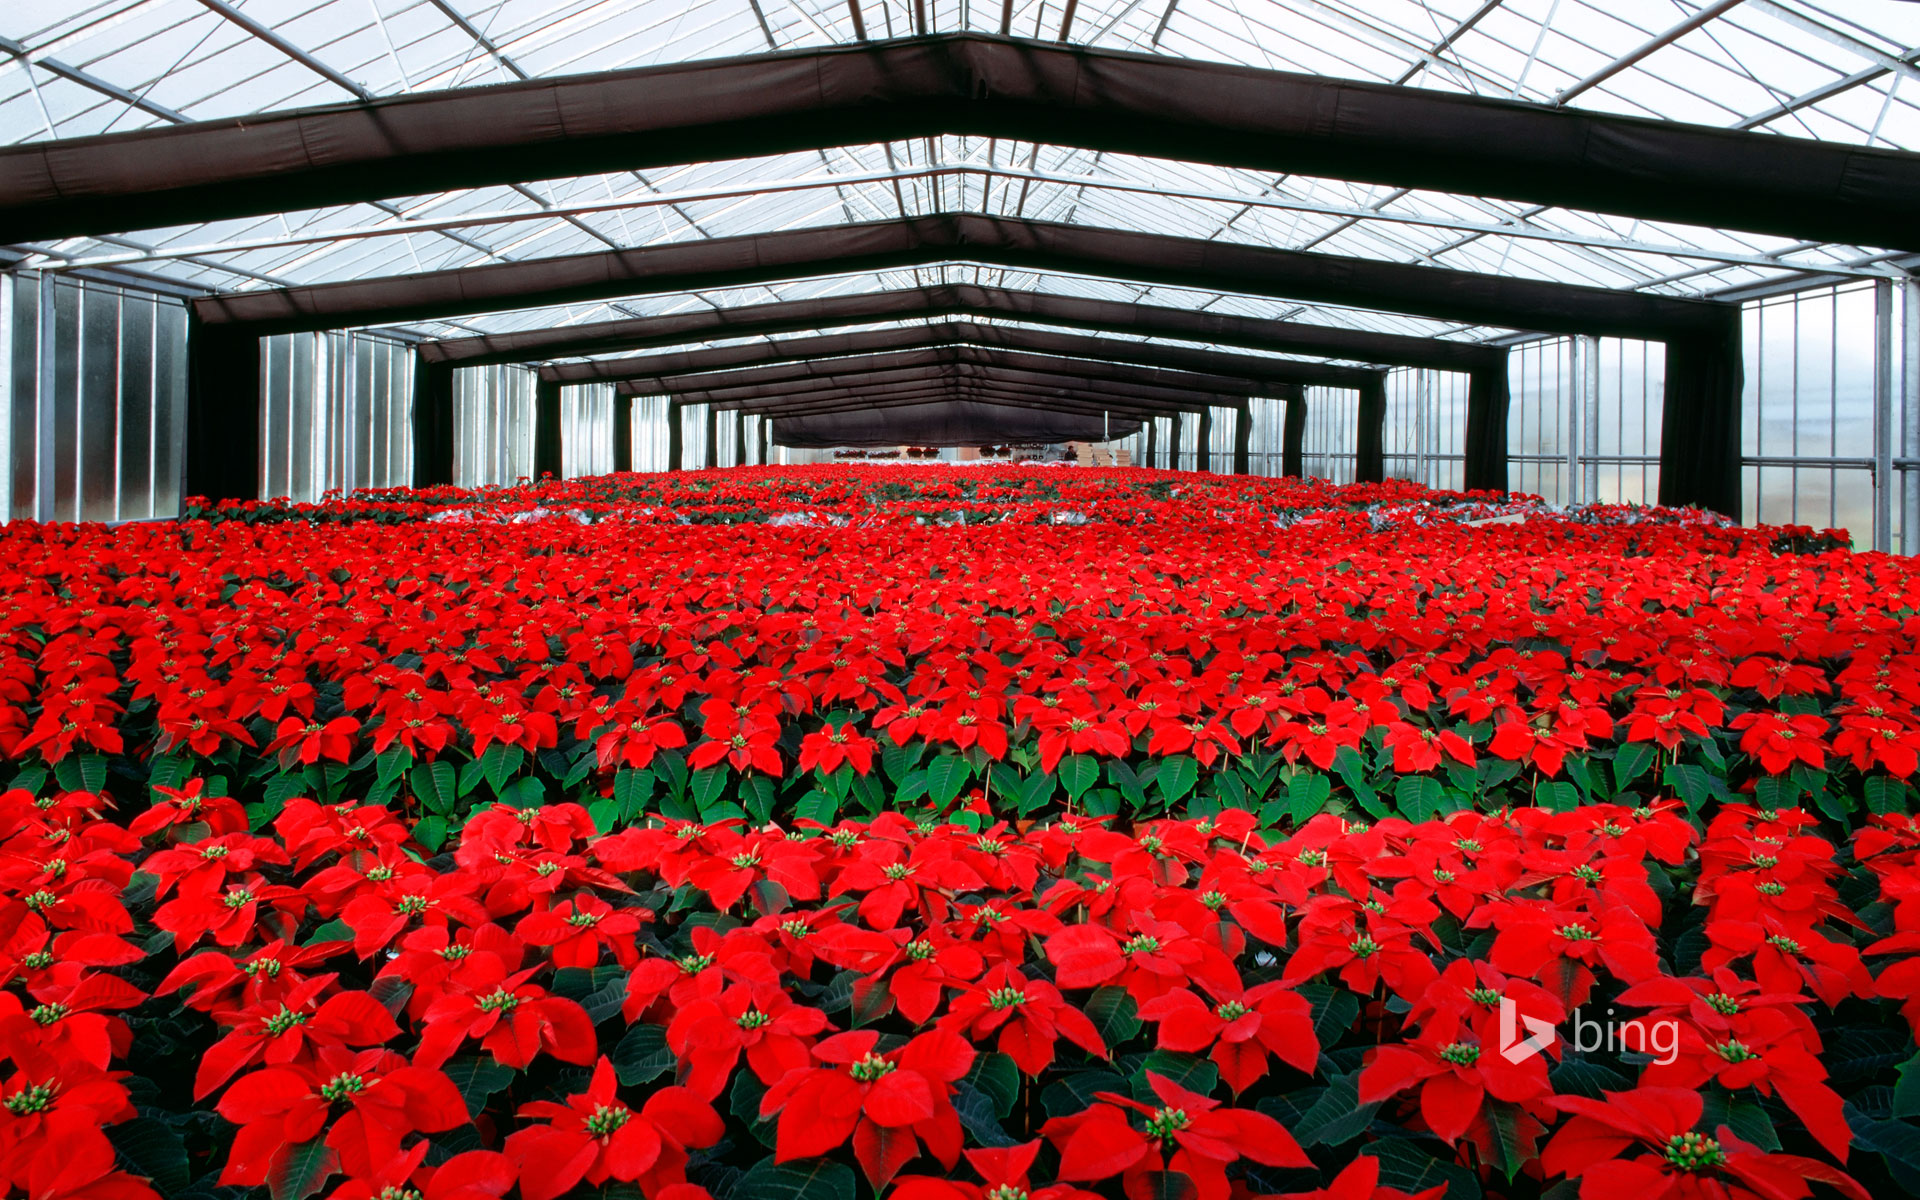 Poinsettia plants under cultivation in a greenhouse